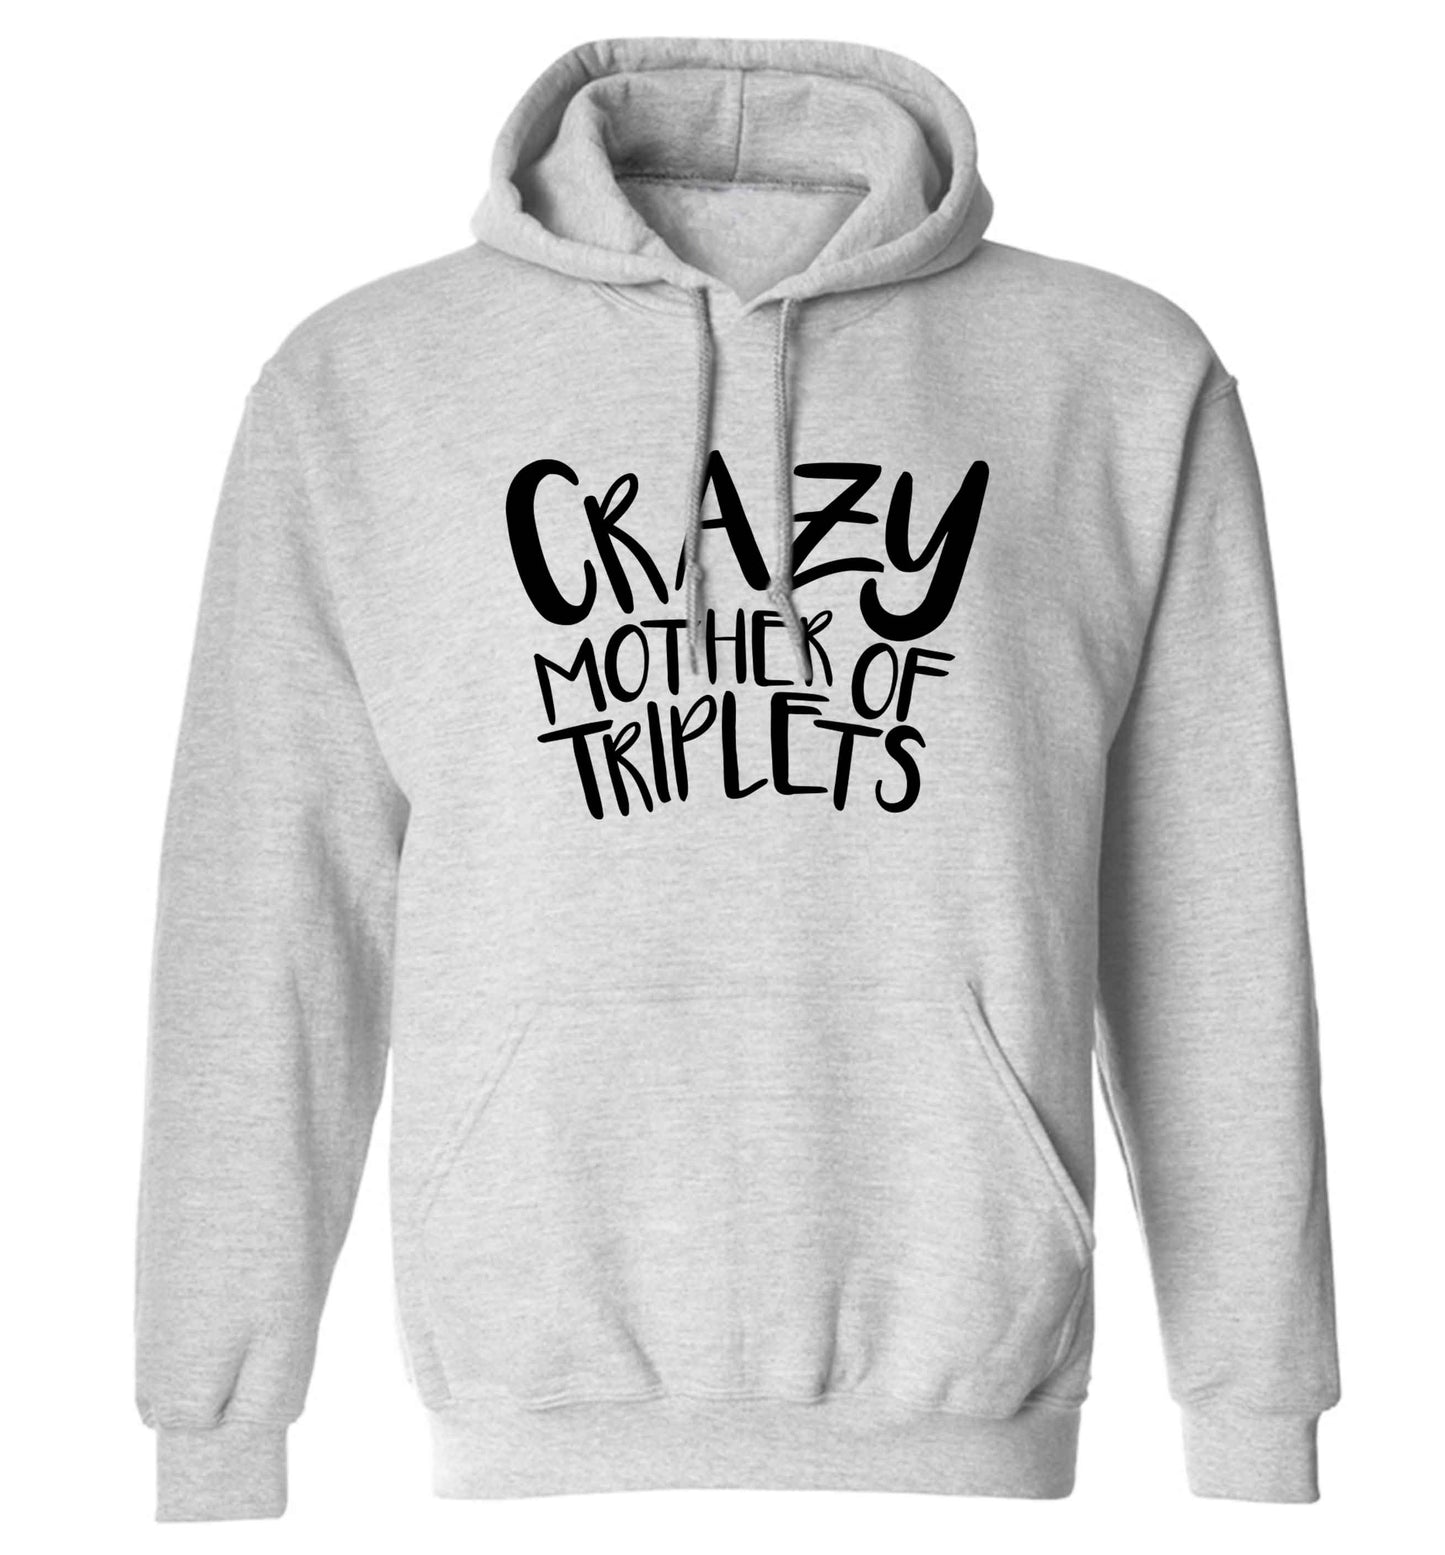 Crazy mother of triplets adults unisex grey hoodie 2XL